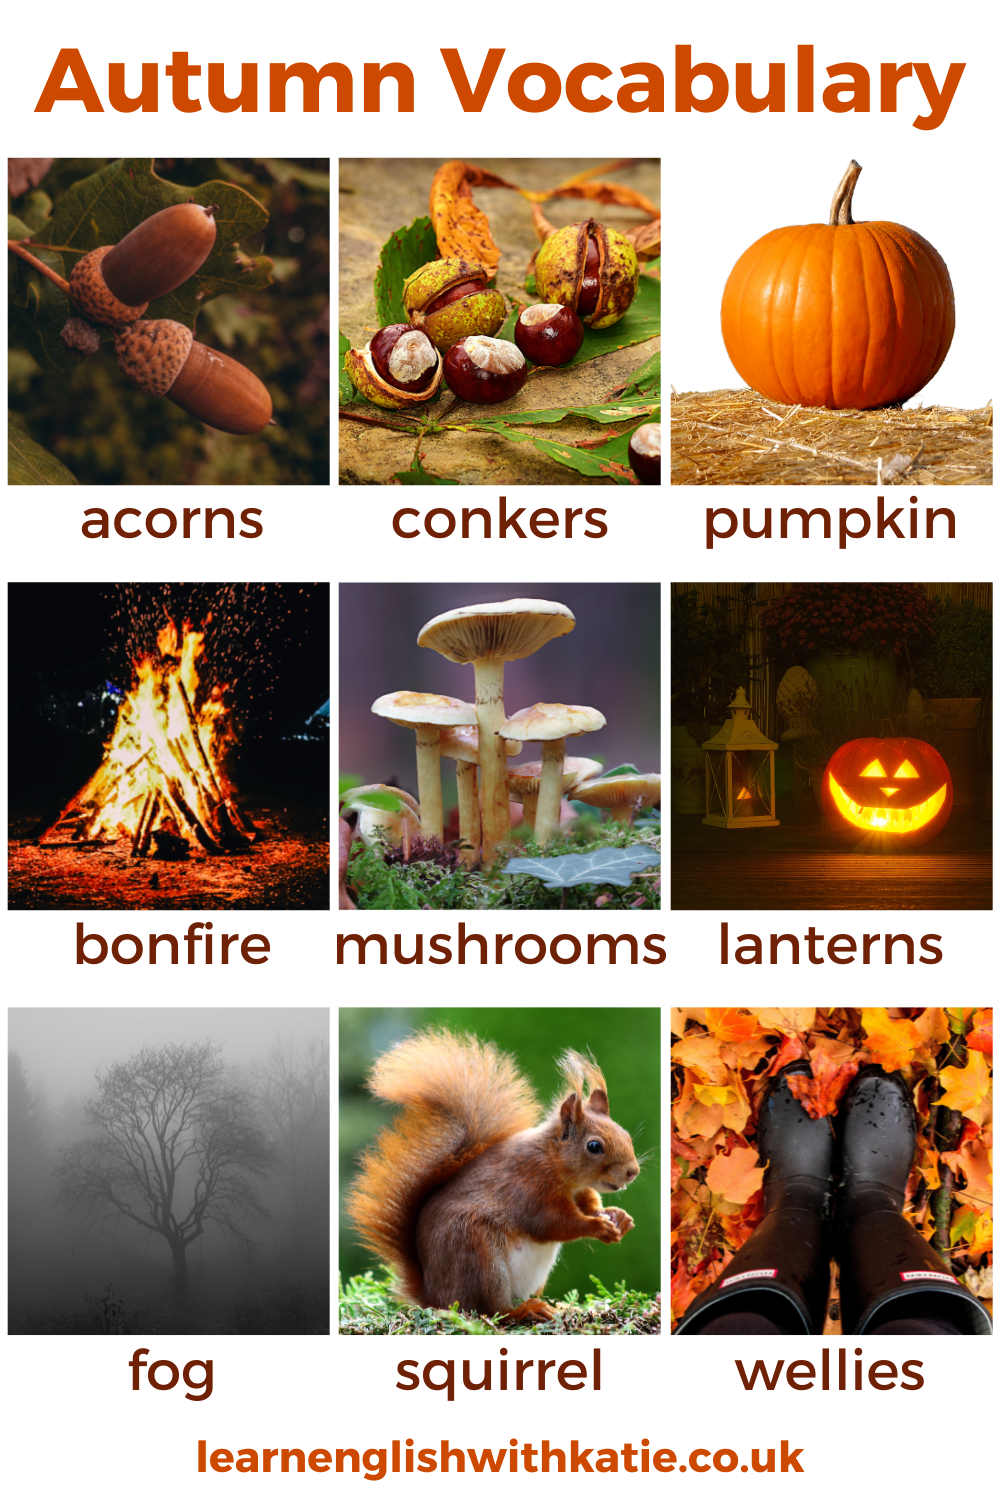 Picture dictionary of autumn words from the text.